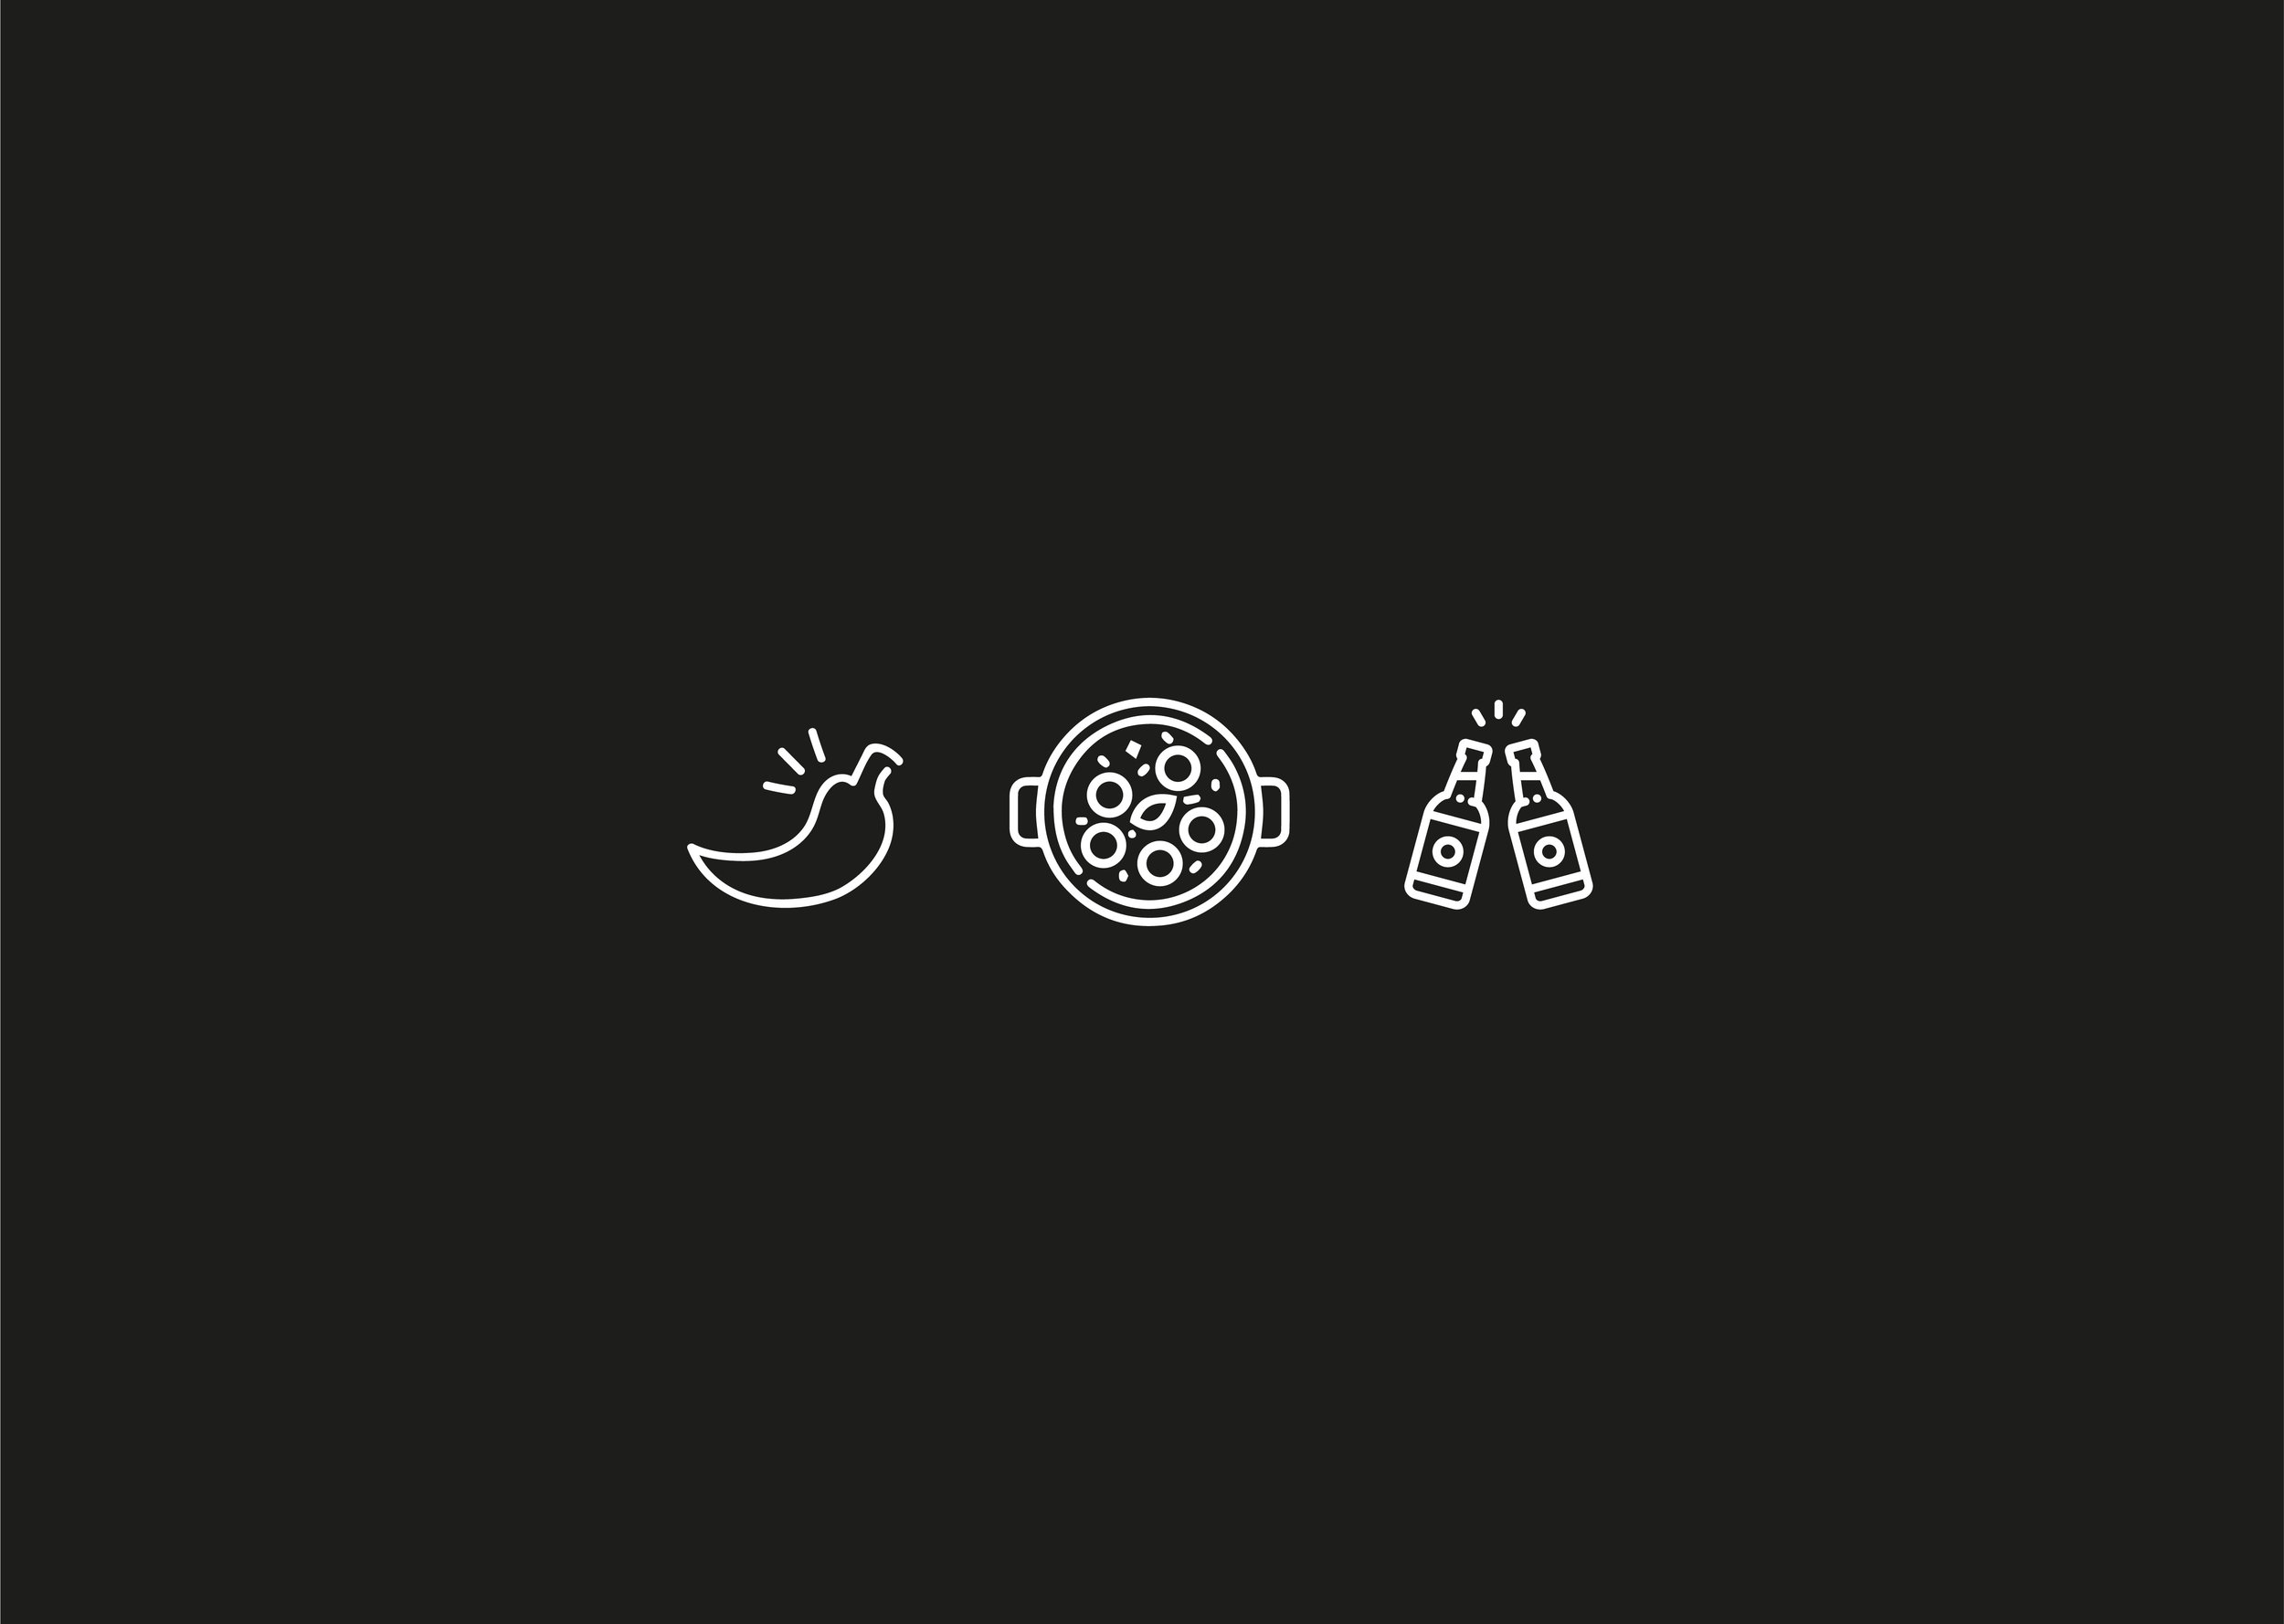 Graphic Designer London. Three food vector icons in black background